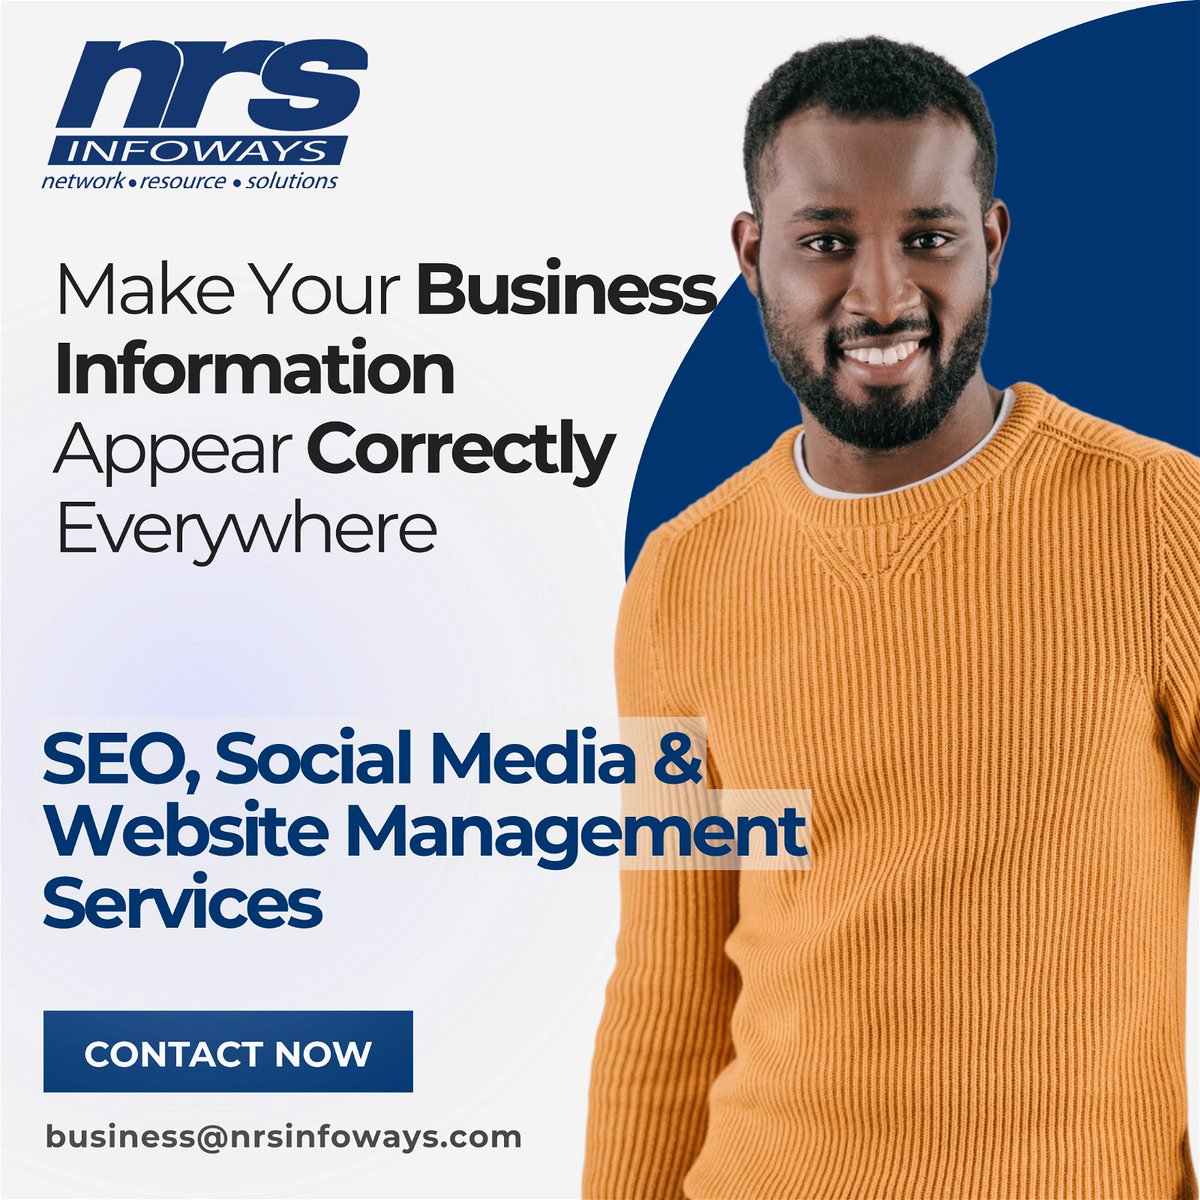 Make Your Business Information Appear Correctly Everywhere

Your business name, address, and phone number should be correct wherever it appears. 

We can help
Lets discuss business@nrsinfoways.com
#localseo #businessinformation #onlinelistings #directorycorrections #nrsinfoways